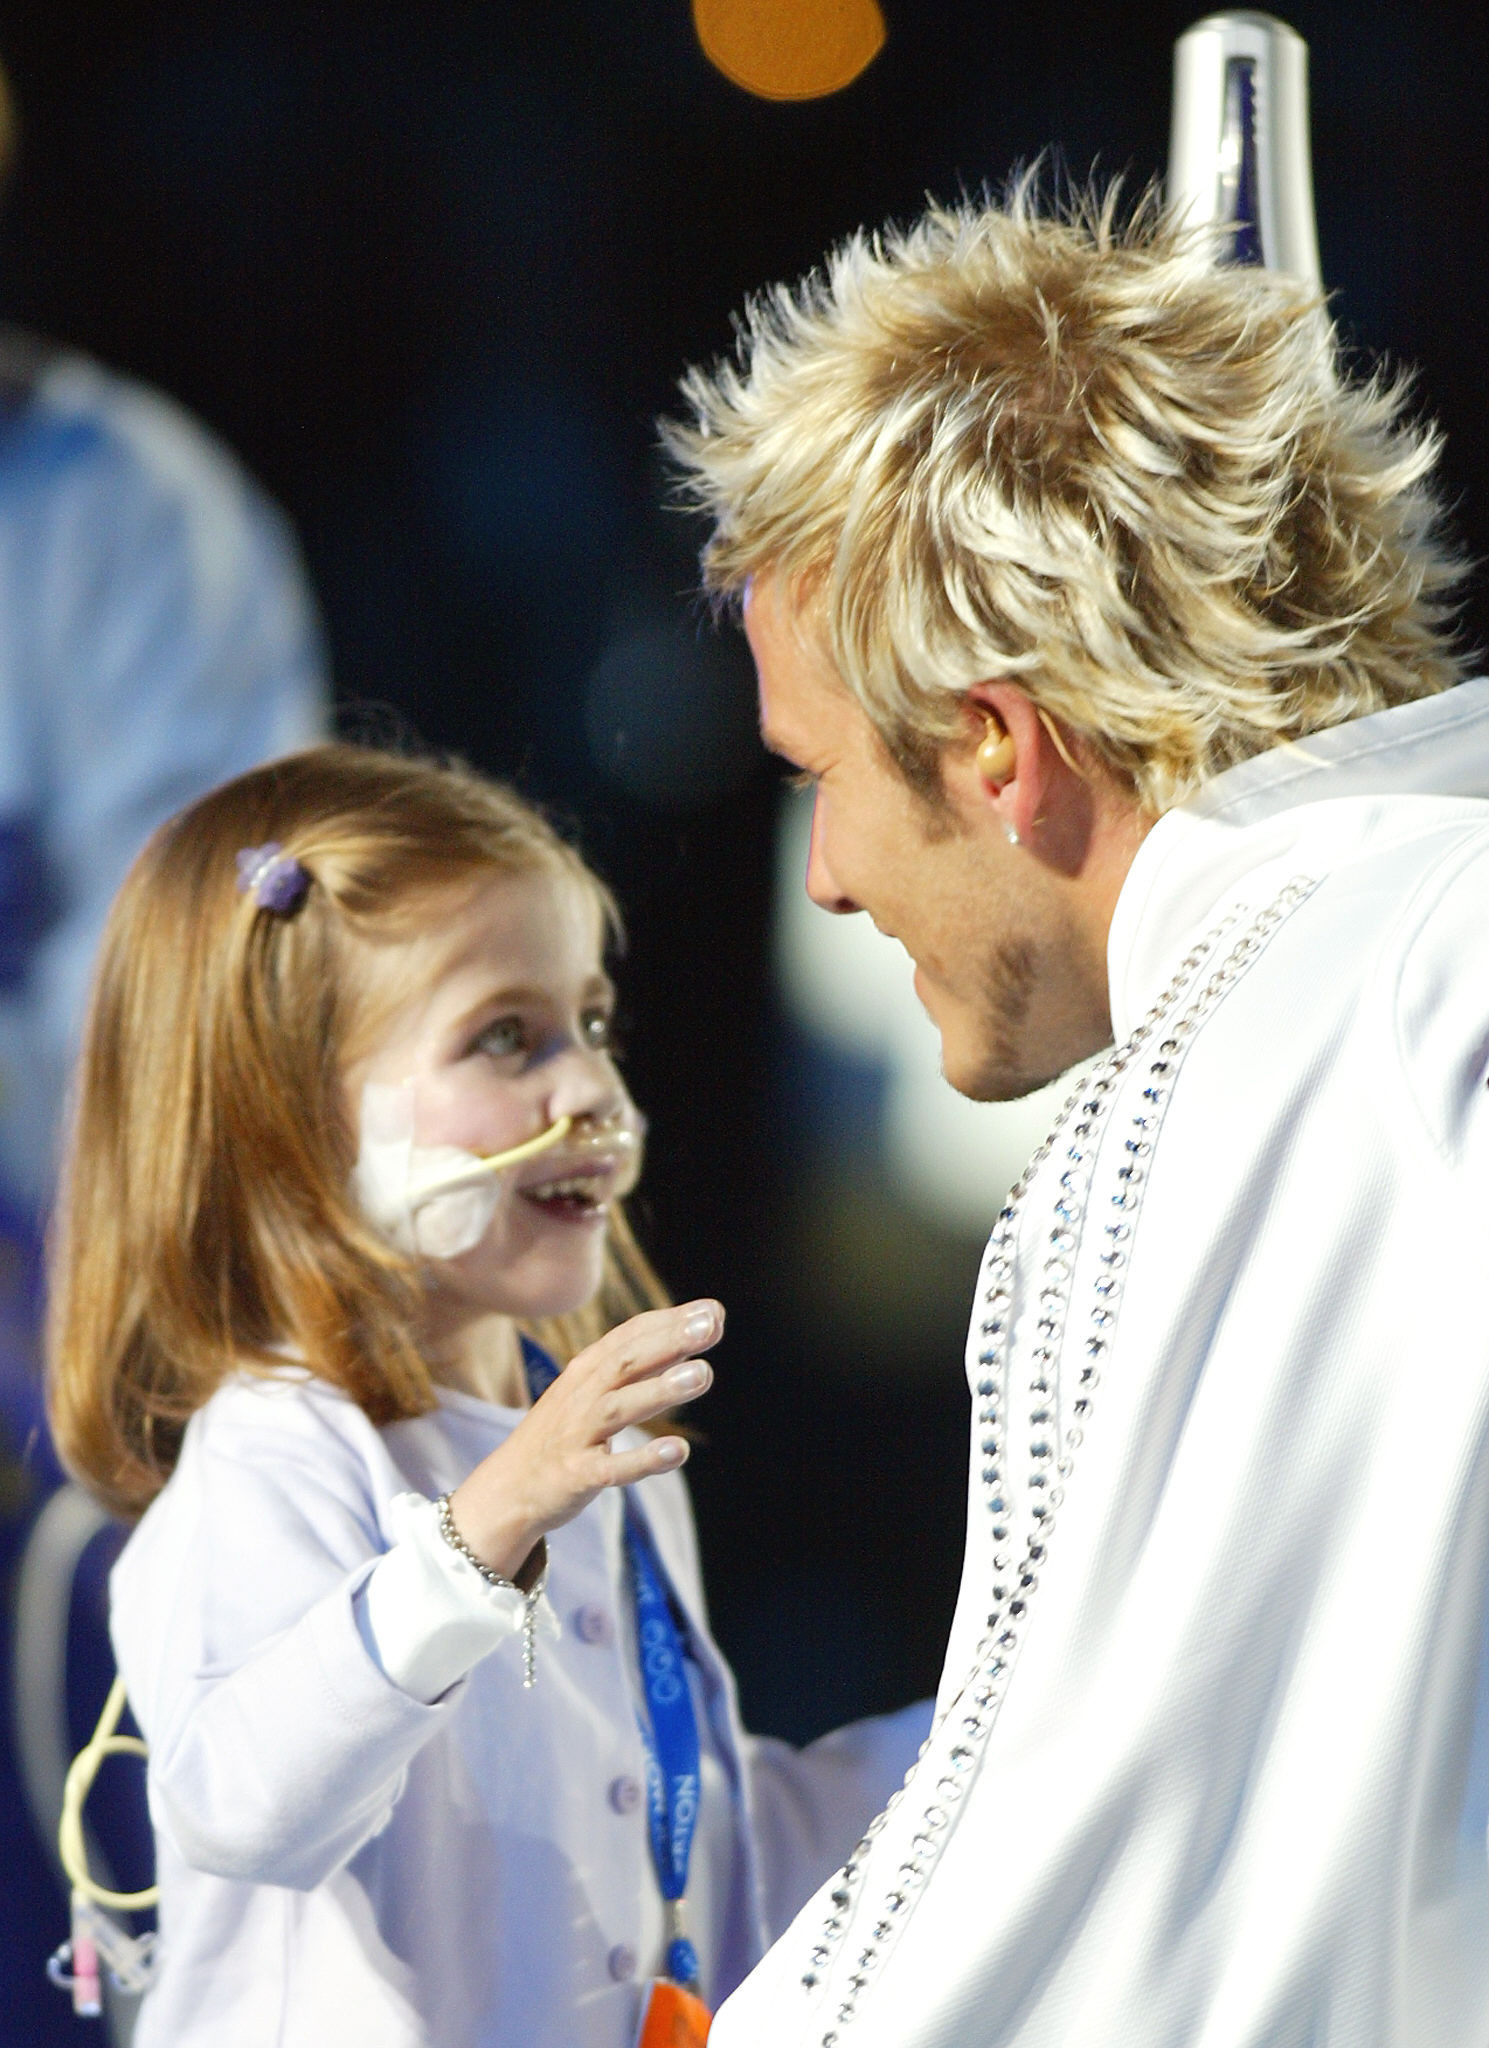 3. David Beckham joins Kirsty Howard for inspirational handover of Baton to Queen at Manchester 2002